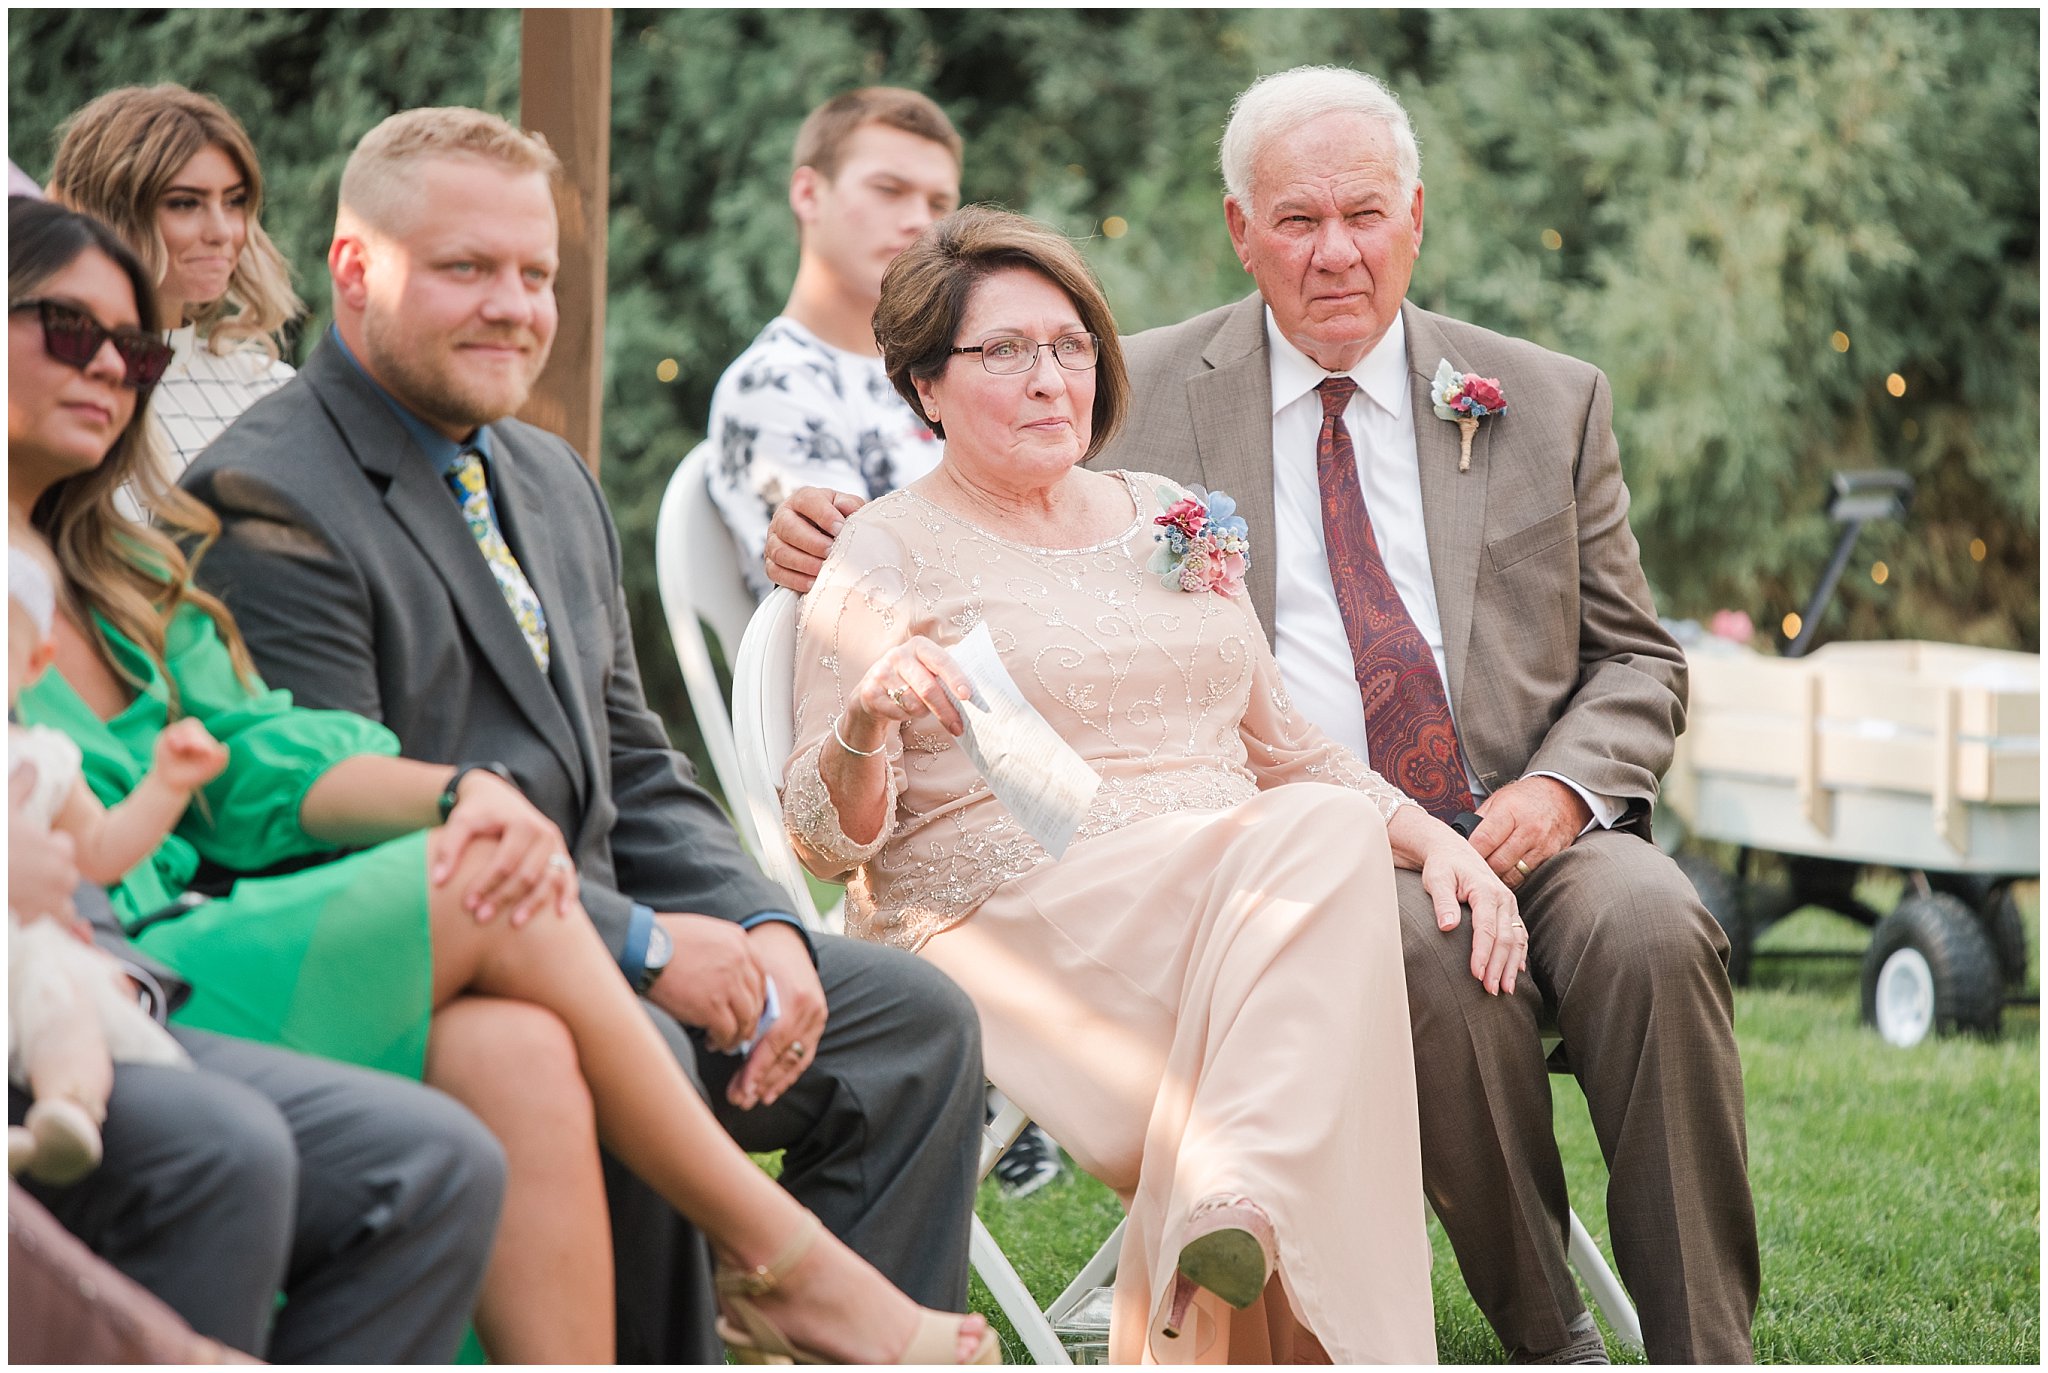 Grandparents at wedding ceremony | Dusty Blue and Rose Summer Wedding at Oak Hills Utah | Jessie and Dallin Photography